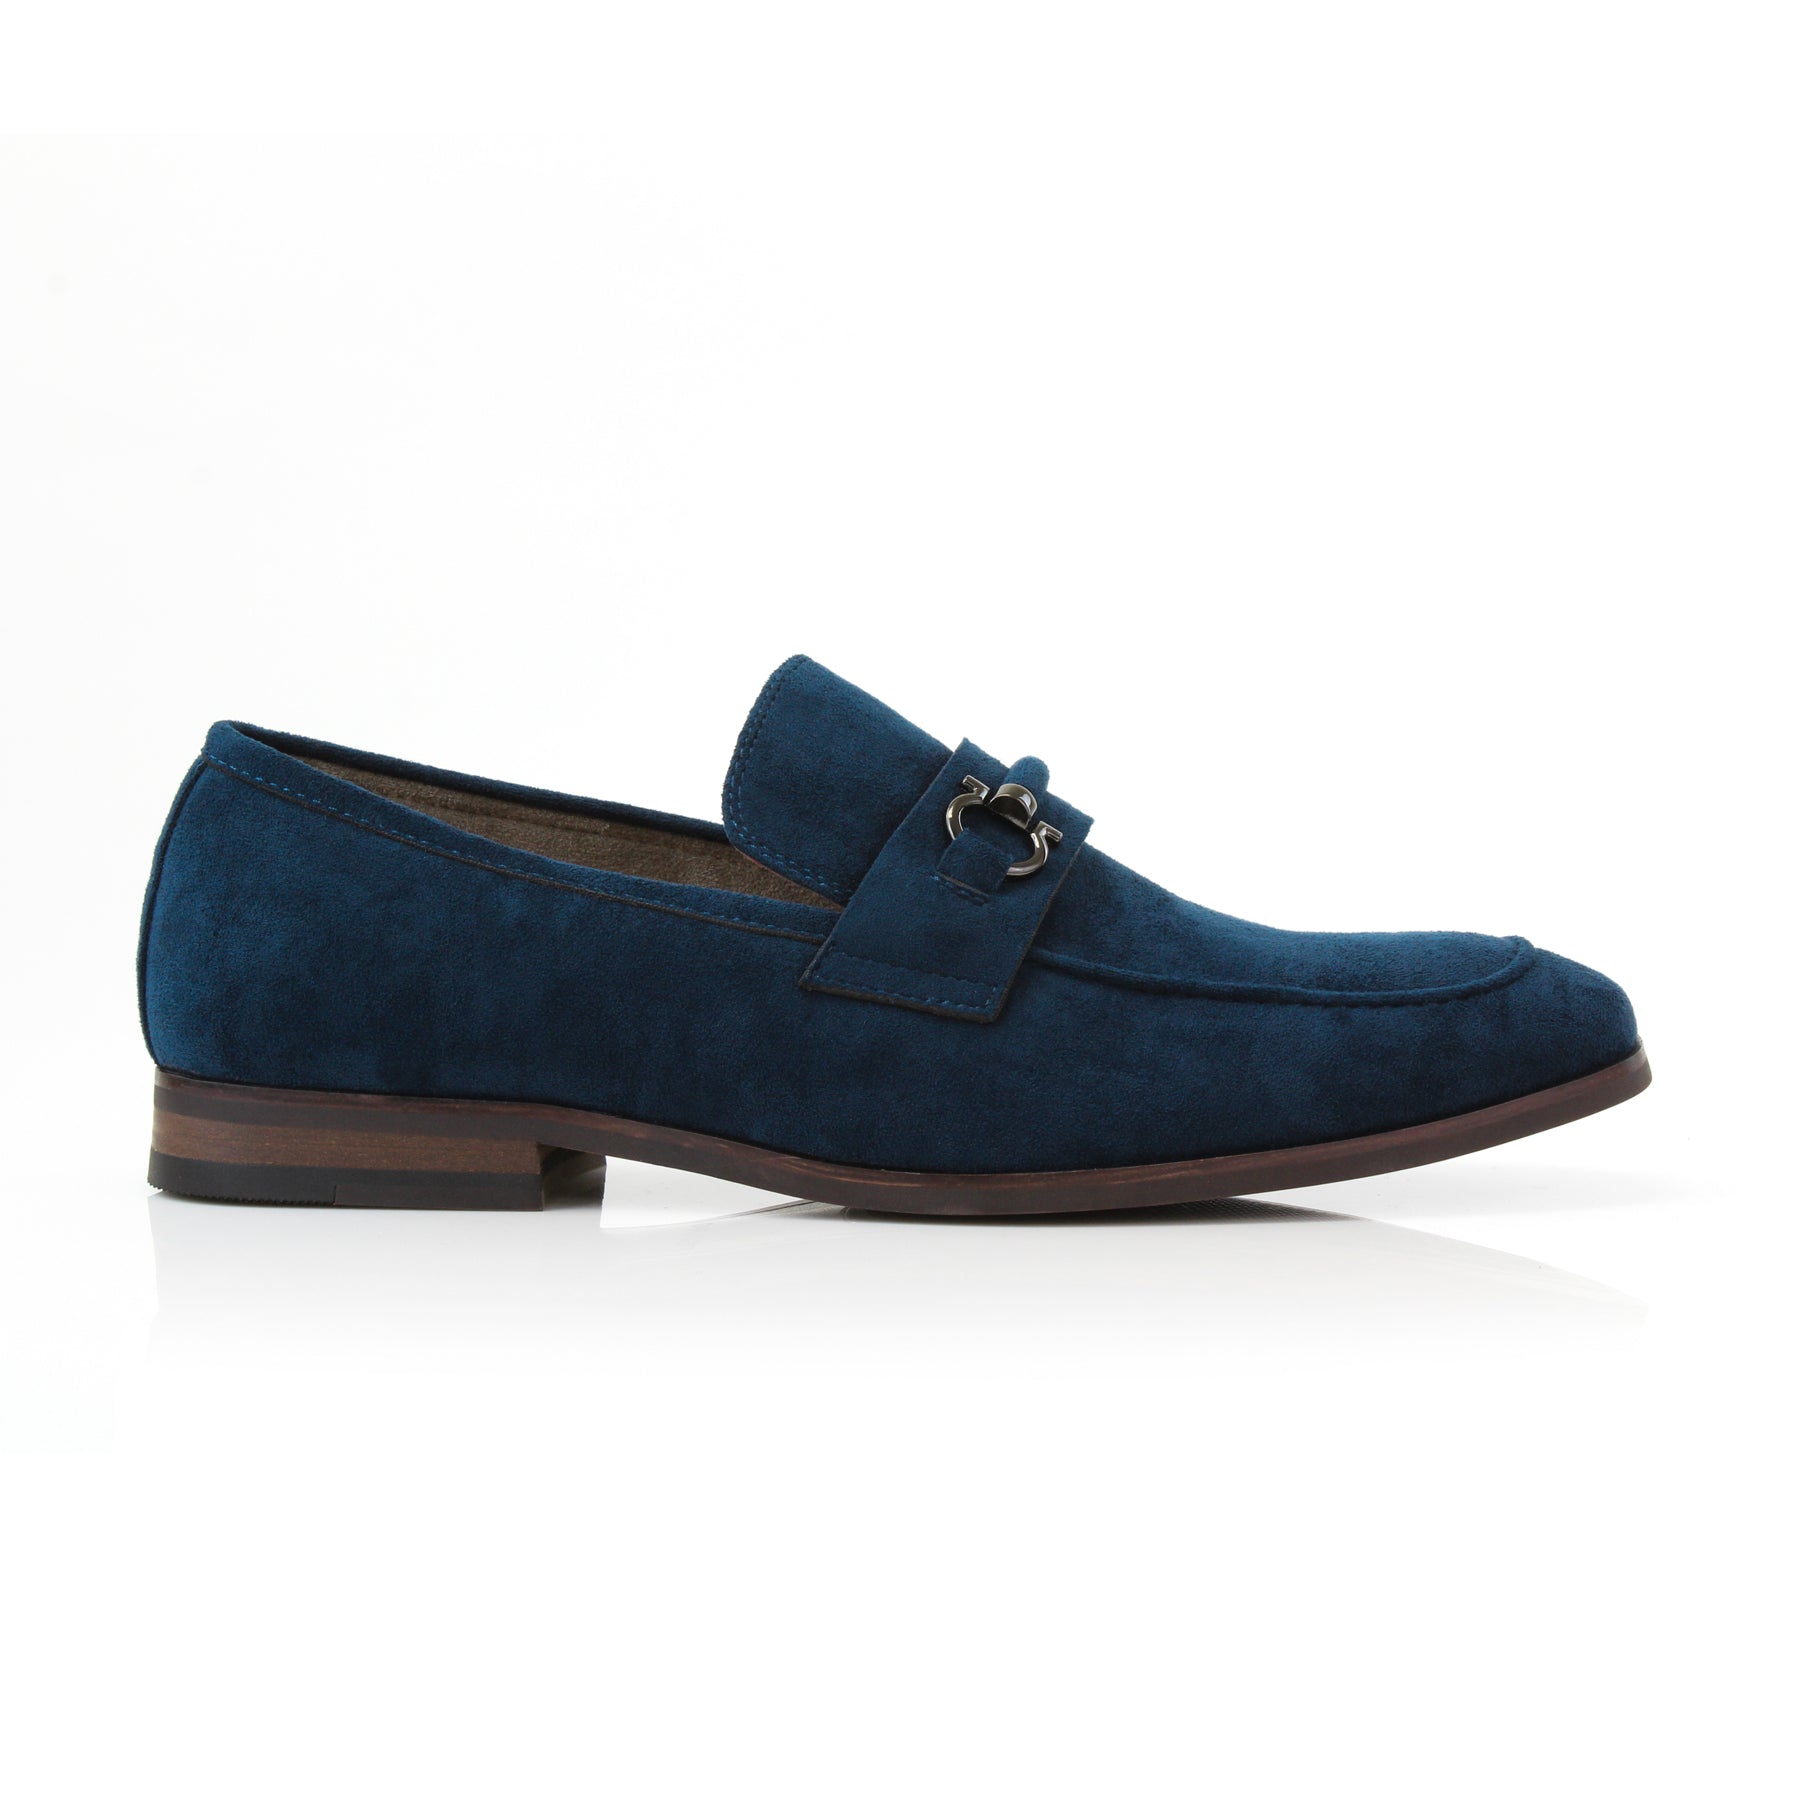 Metal Buckle Suede Loafers | Demitri by Ferro Aldo | Conal Footwear | Outer Side Angle View